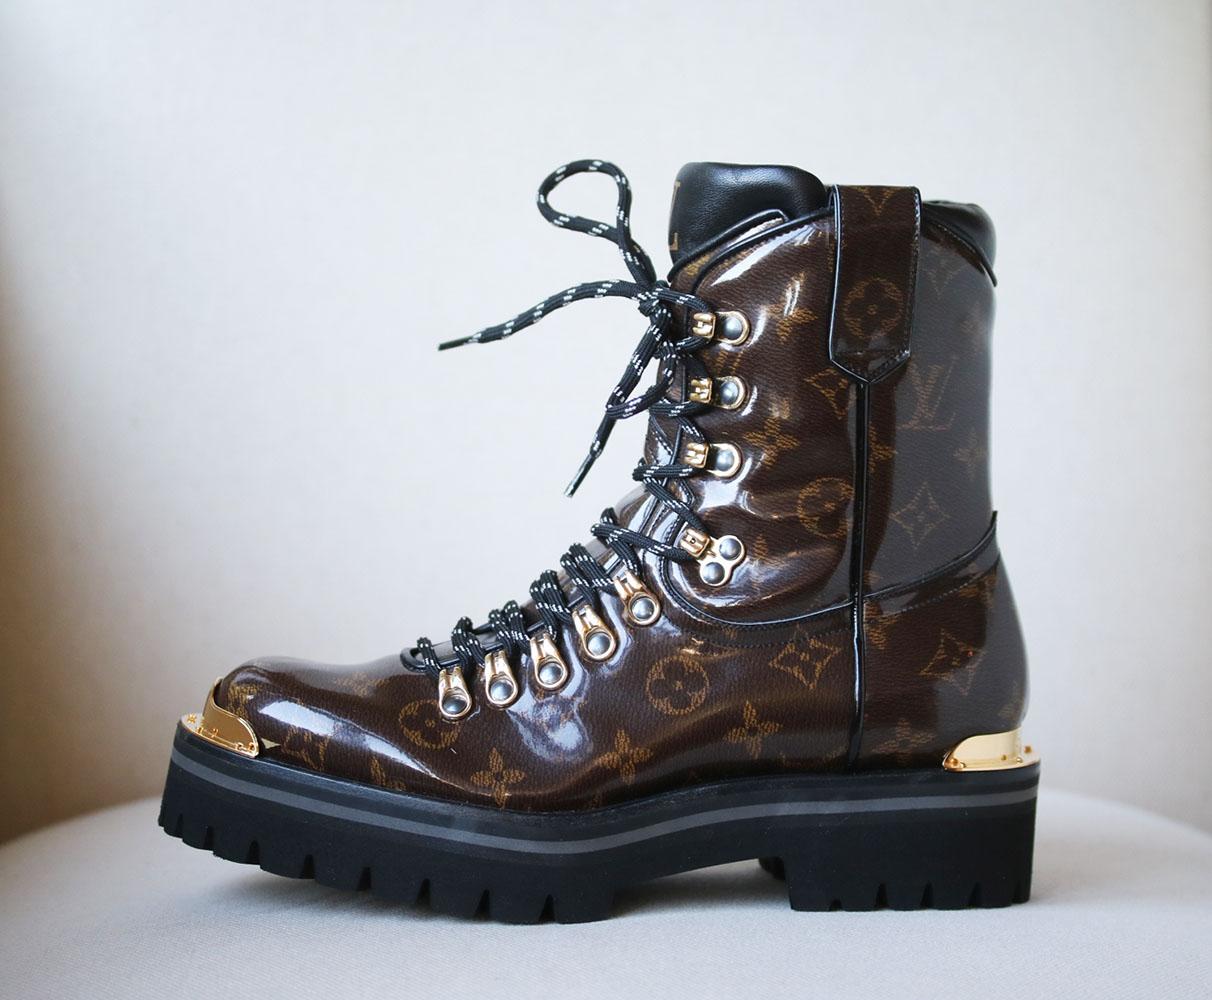 Louis Vuitton Outland Boots - For Sale on 1stDibs